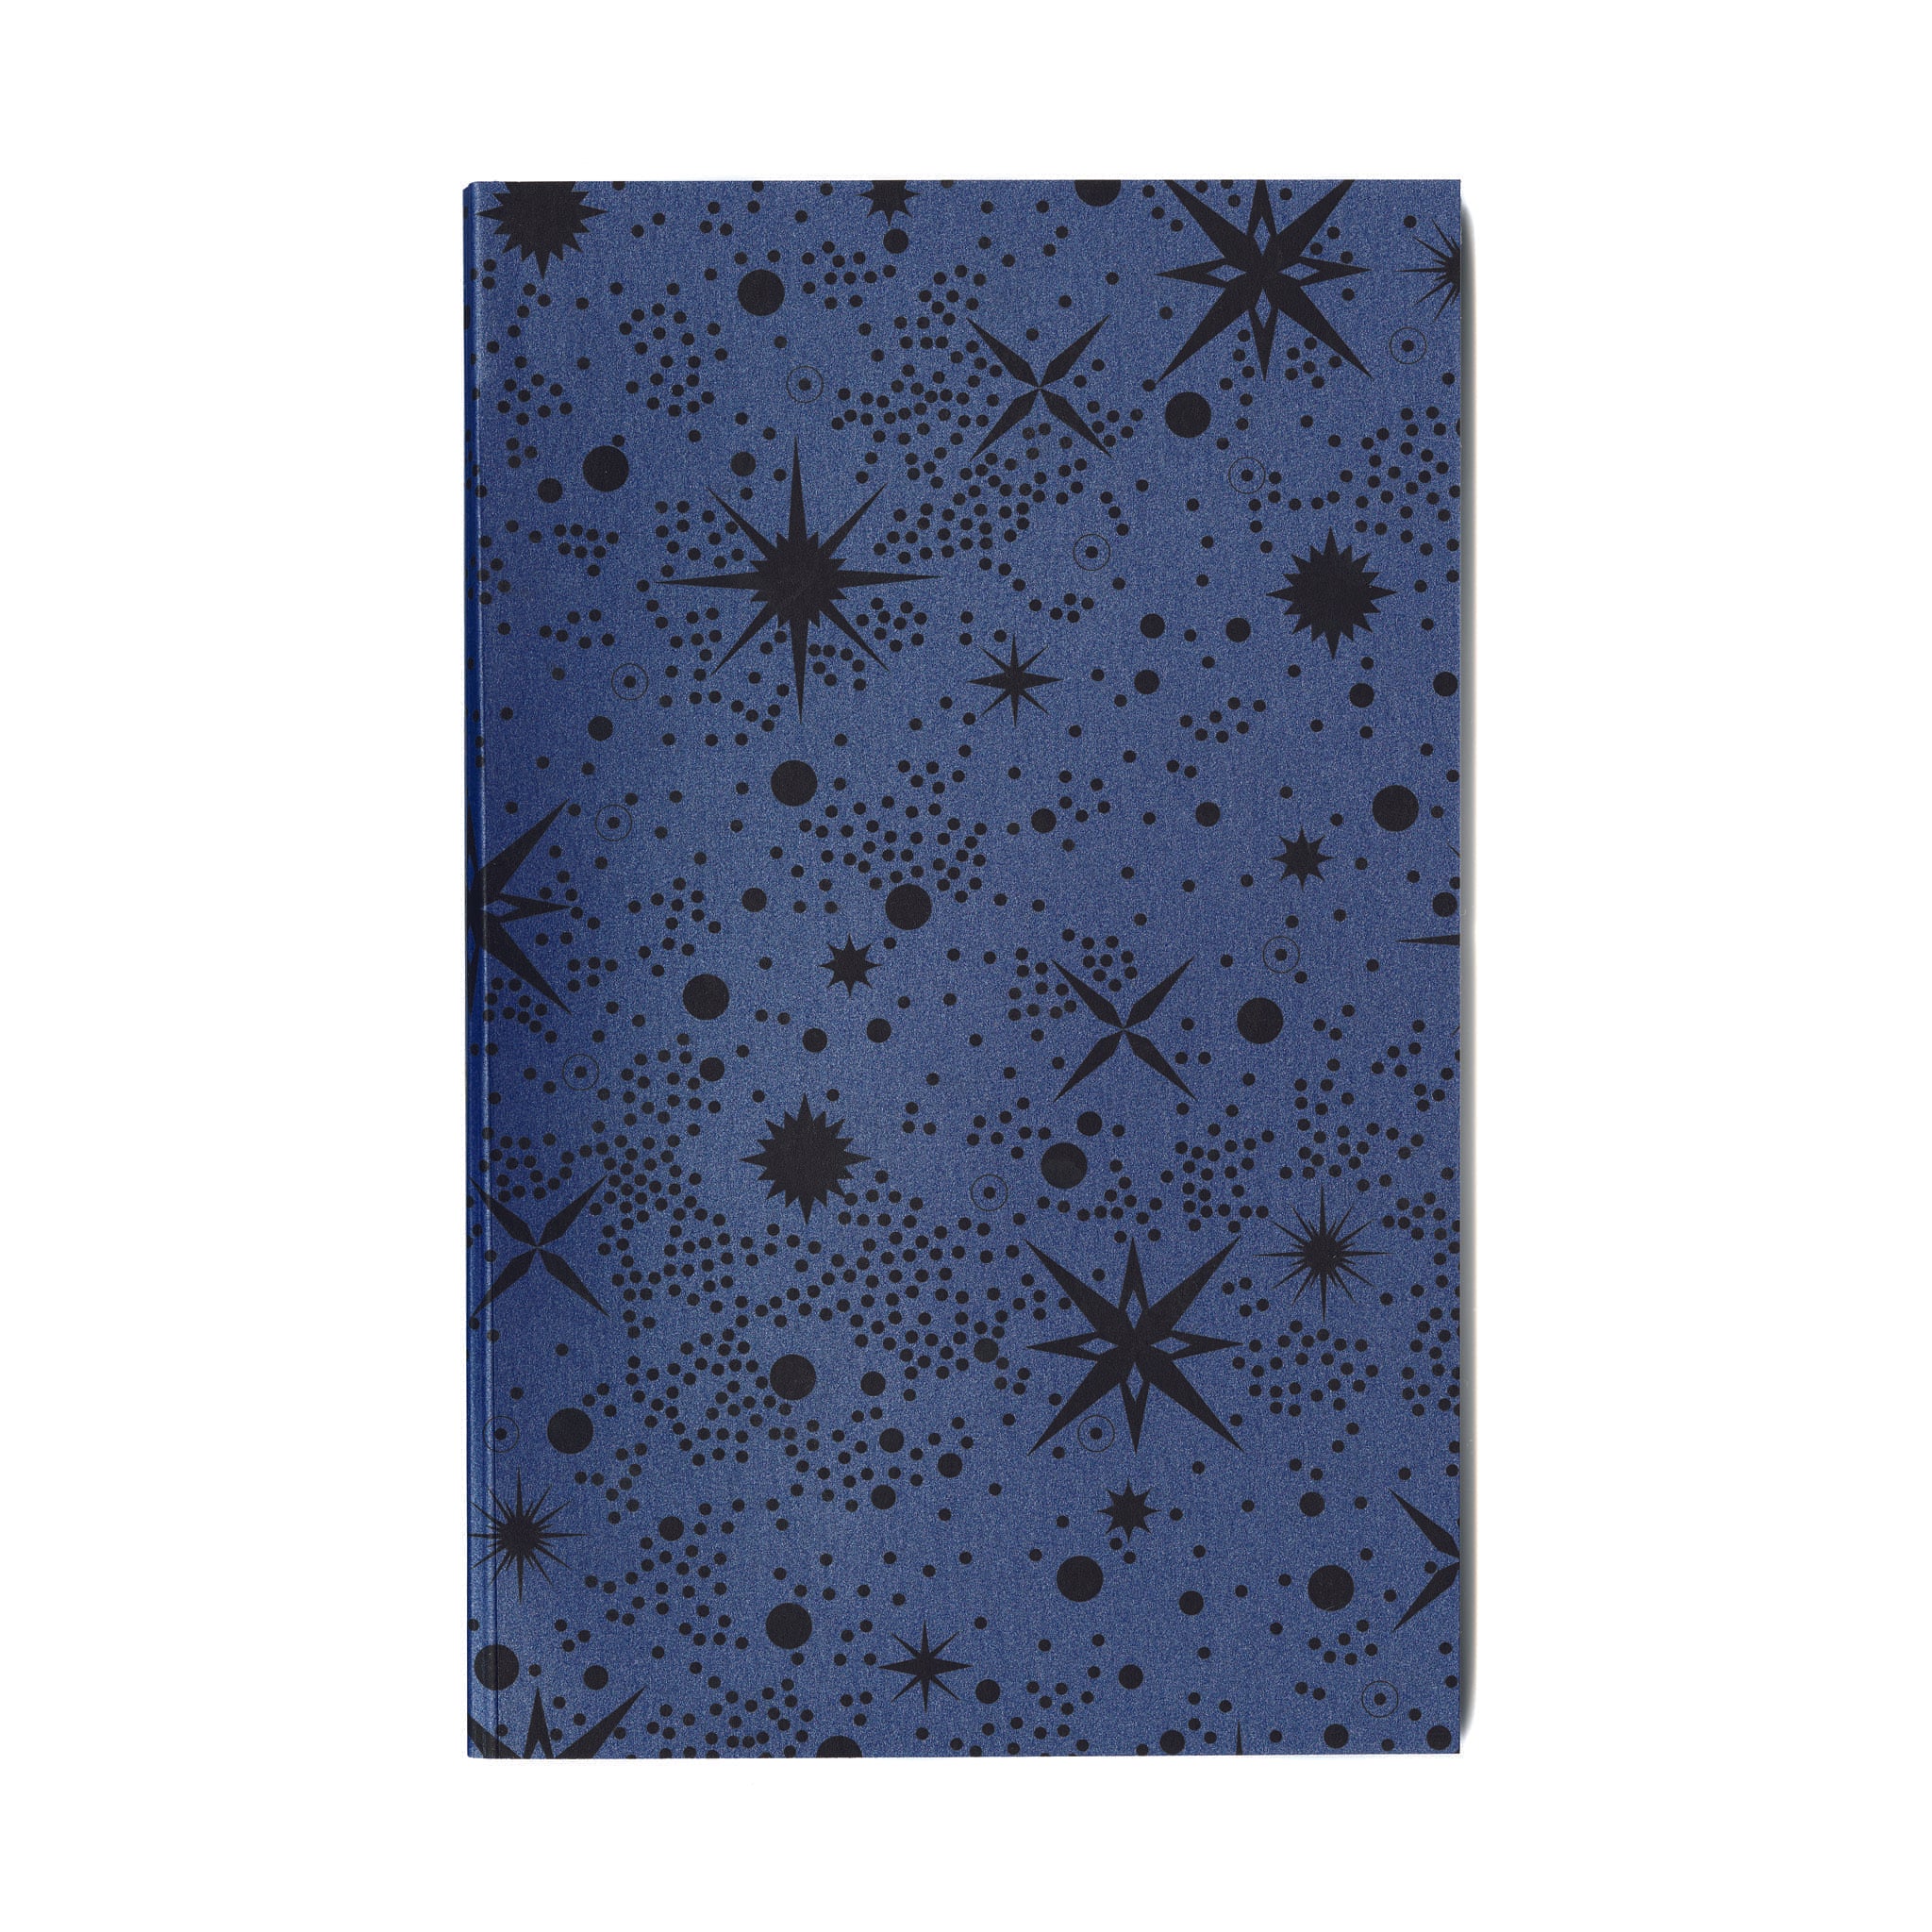 Everyday journal with original blue starry print cover and eighty 100% cotton paper pages